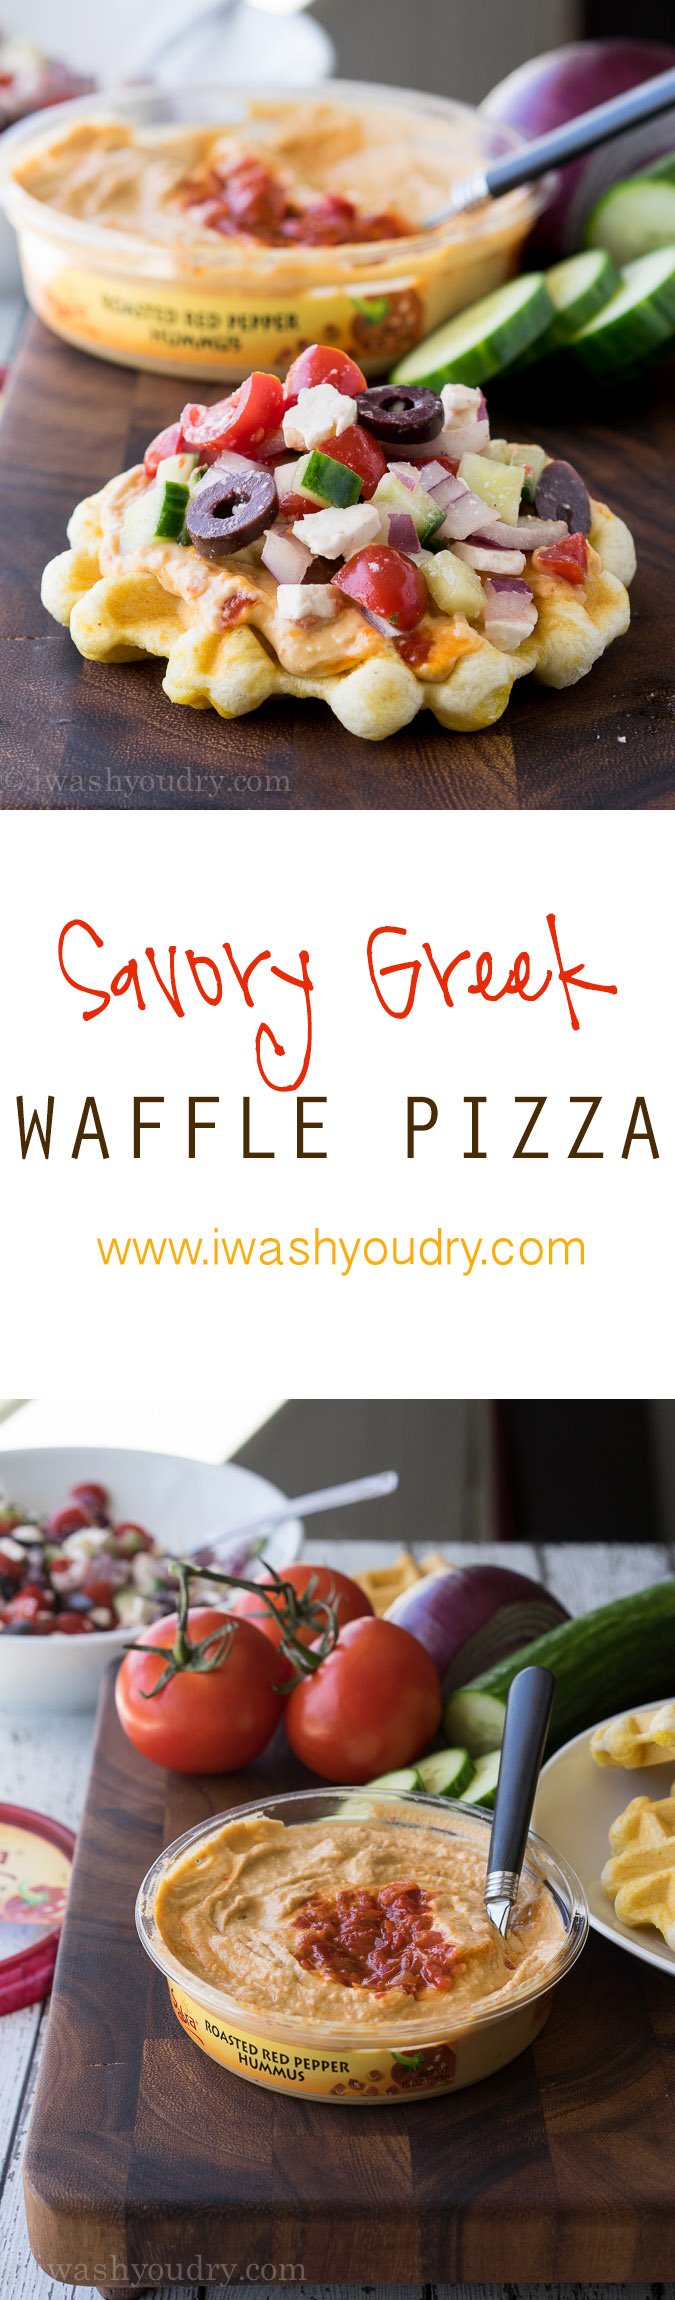 Such a fun and easy lunch or appetizer! Savory Greek Waffle Pizzas with hummus!